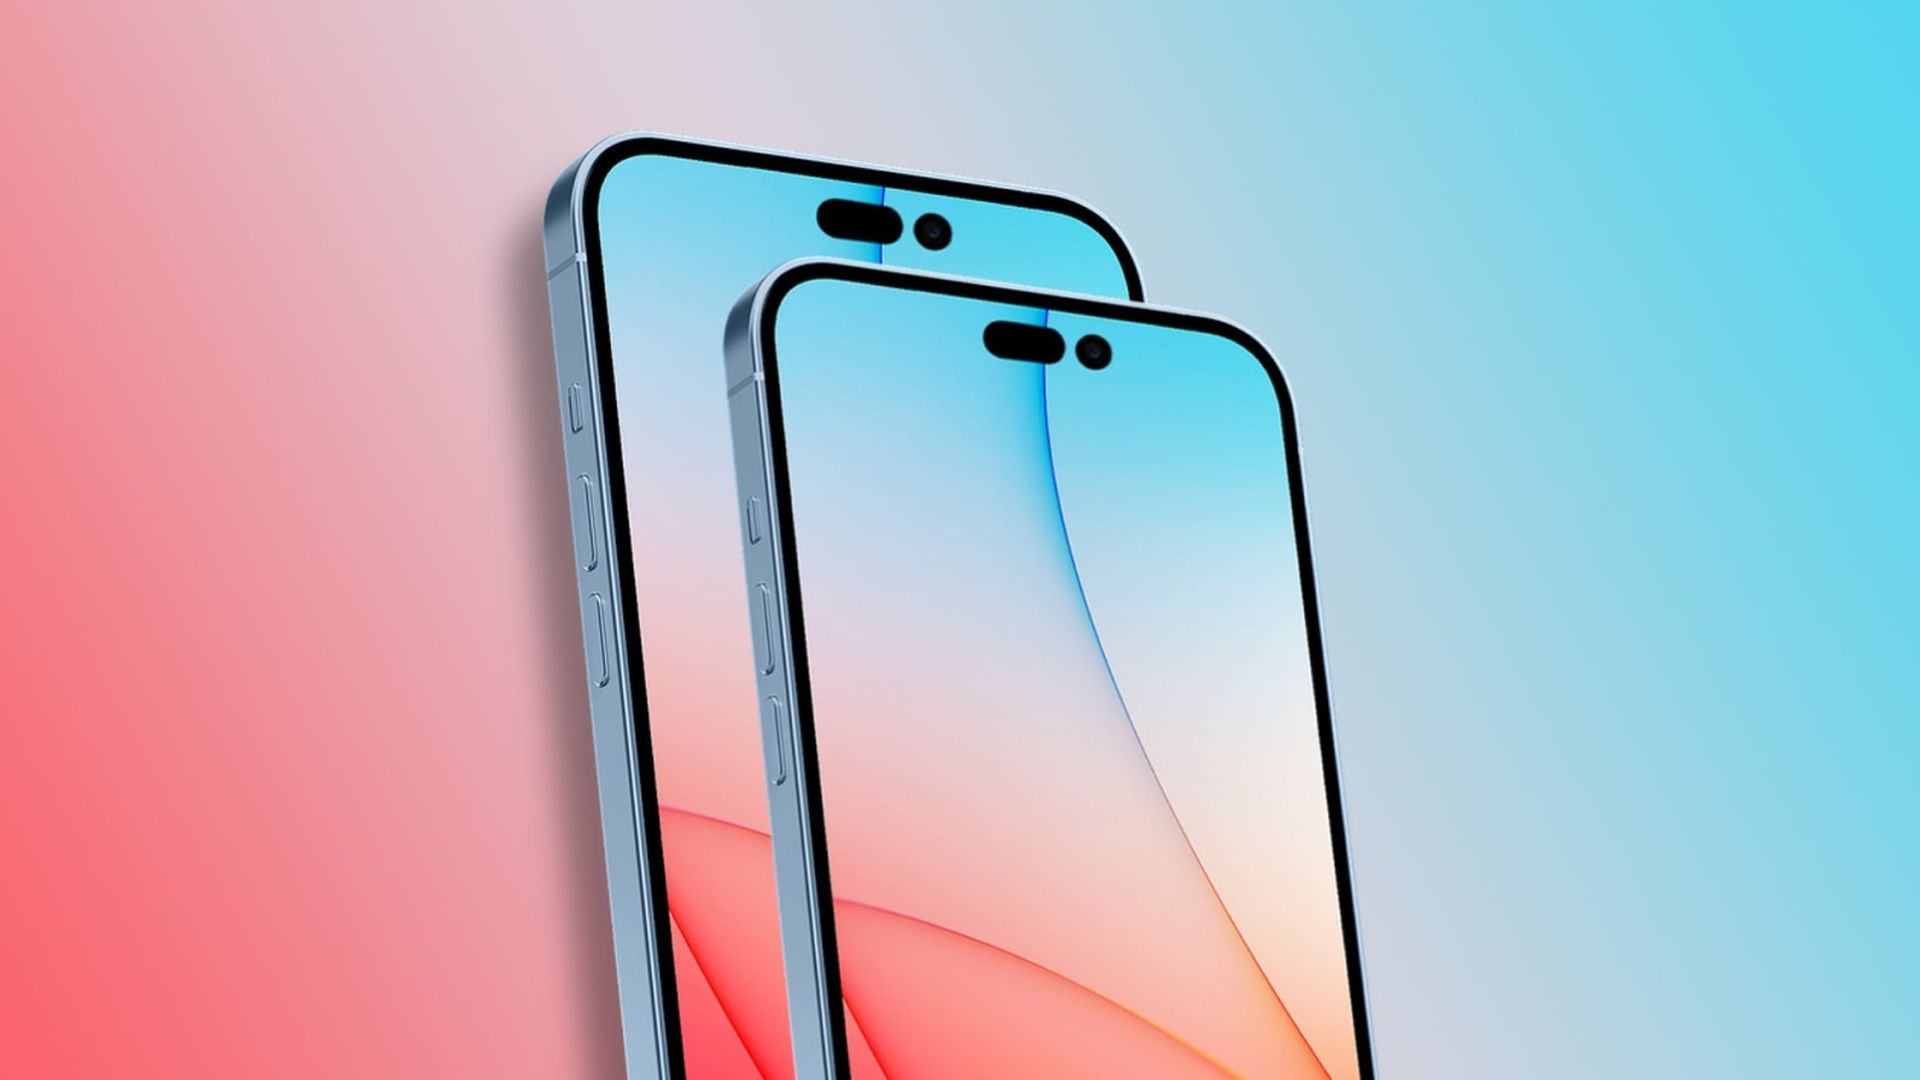 Apple iPhone 14 Pro Max release date and some benchmark results are already here. There are also some renders showing what is the iPhone 14 going to look like.